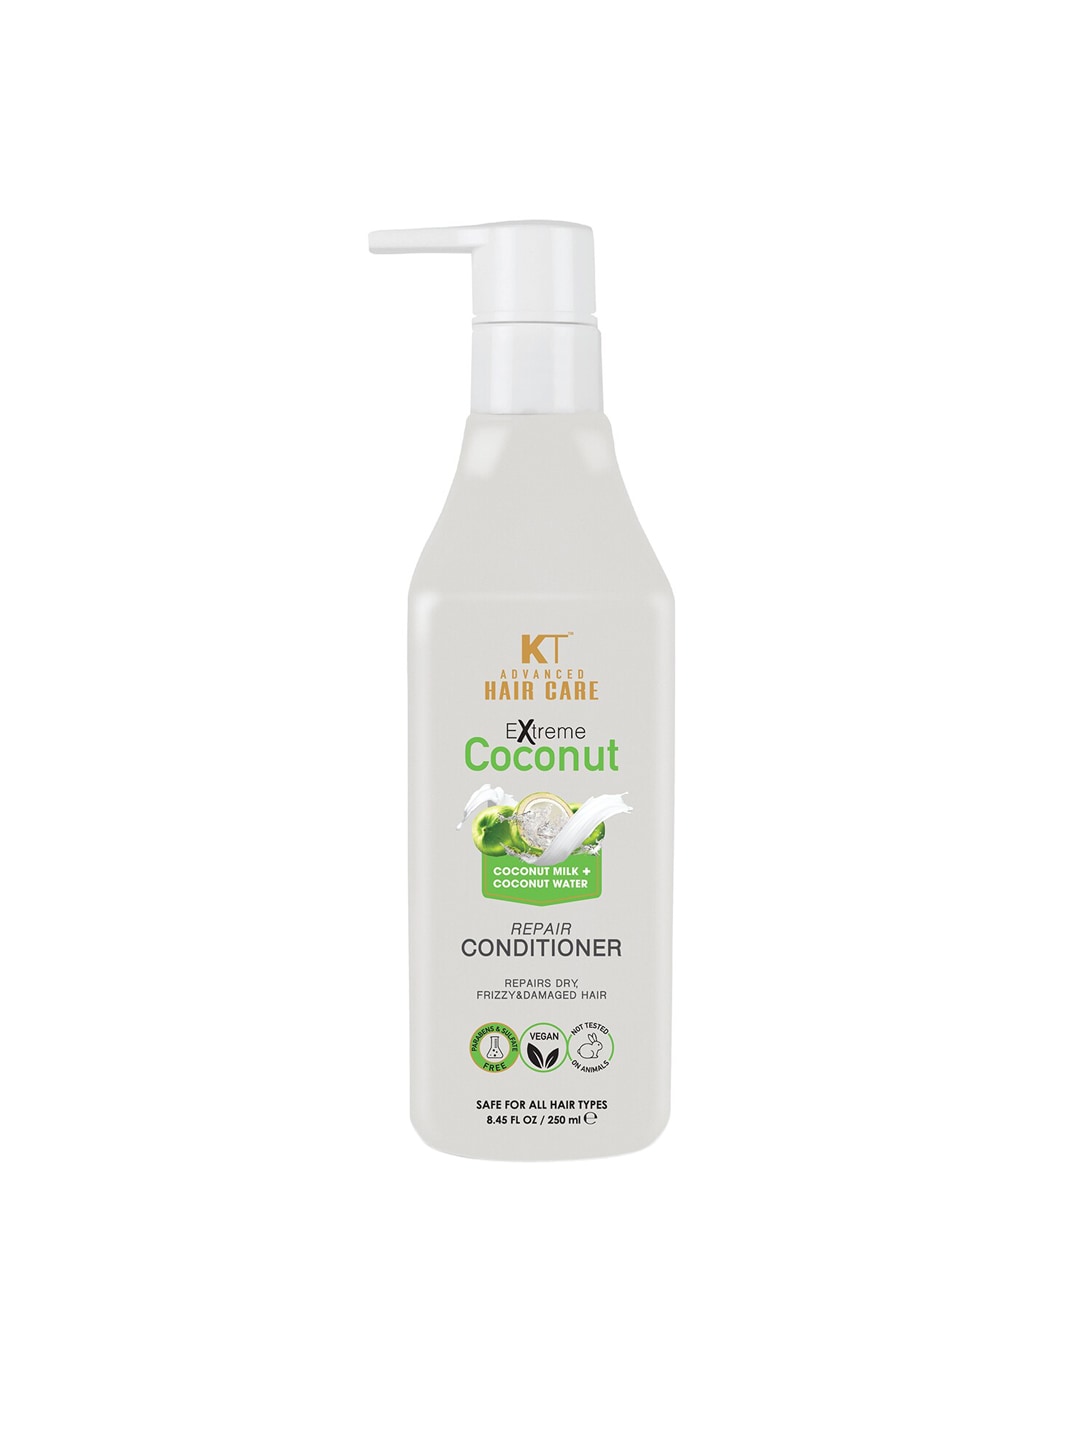 KEHAIRTHERAPY Professional Advanced Hair Care Extreme Coconut Repair Conditioner - 250 ml Price in India